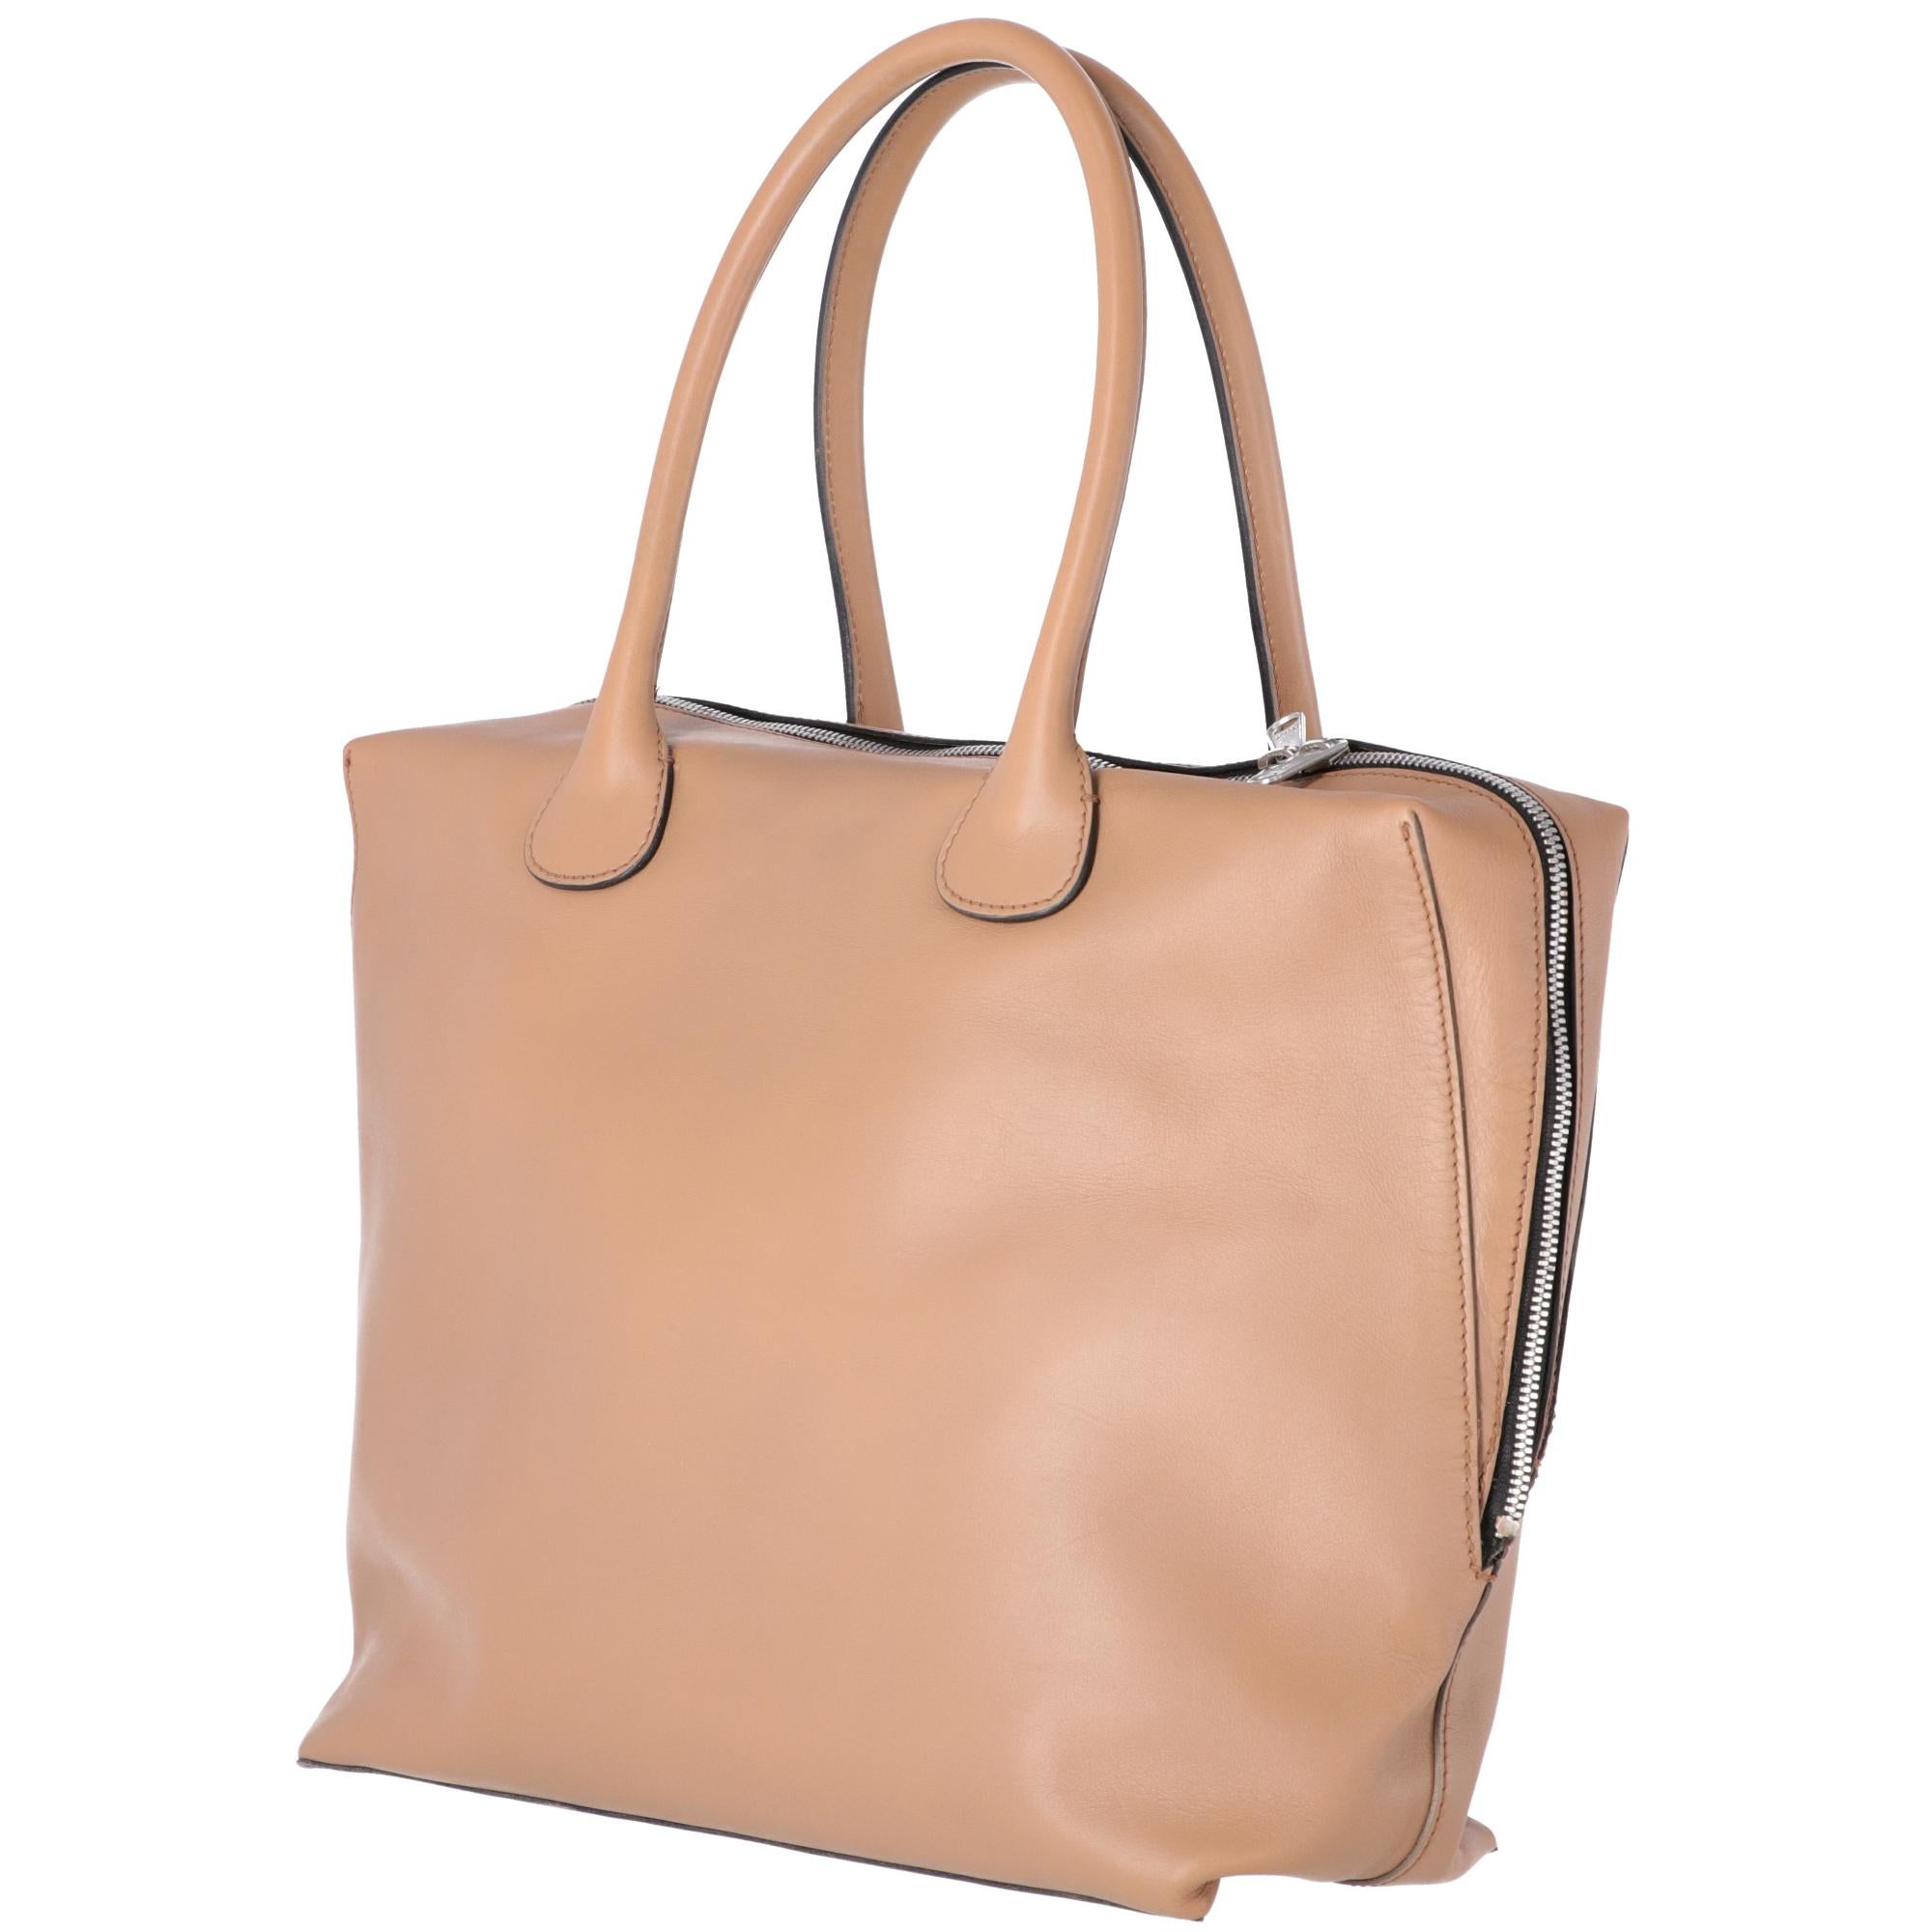 Marni Tote bag beige leather with handles of the same color, silver-plated double-slider zip closure, there are four silver metal feet on the bottom of the bag and beige suede interior.
Years: 2000s

Made in Italy

Width: 37 cm
Height: 28 cm
Depth: